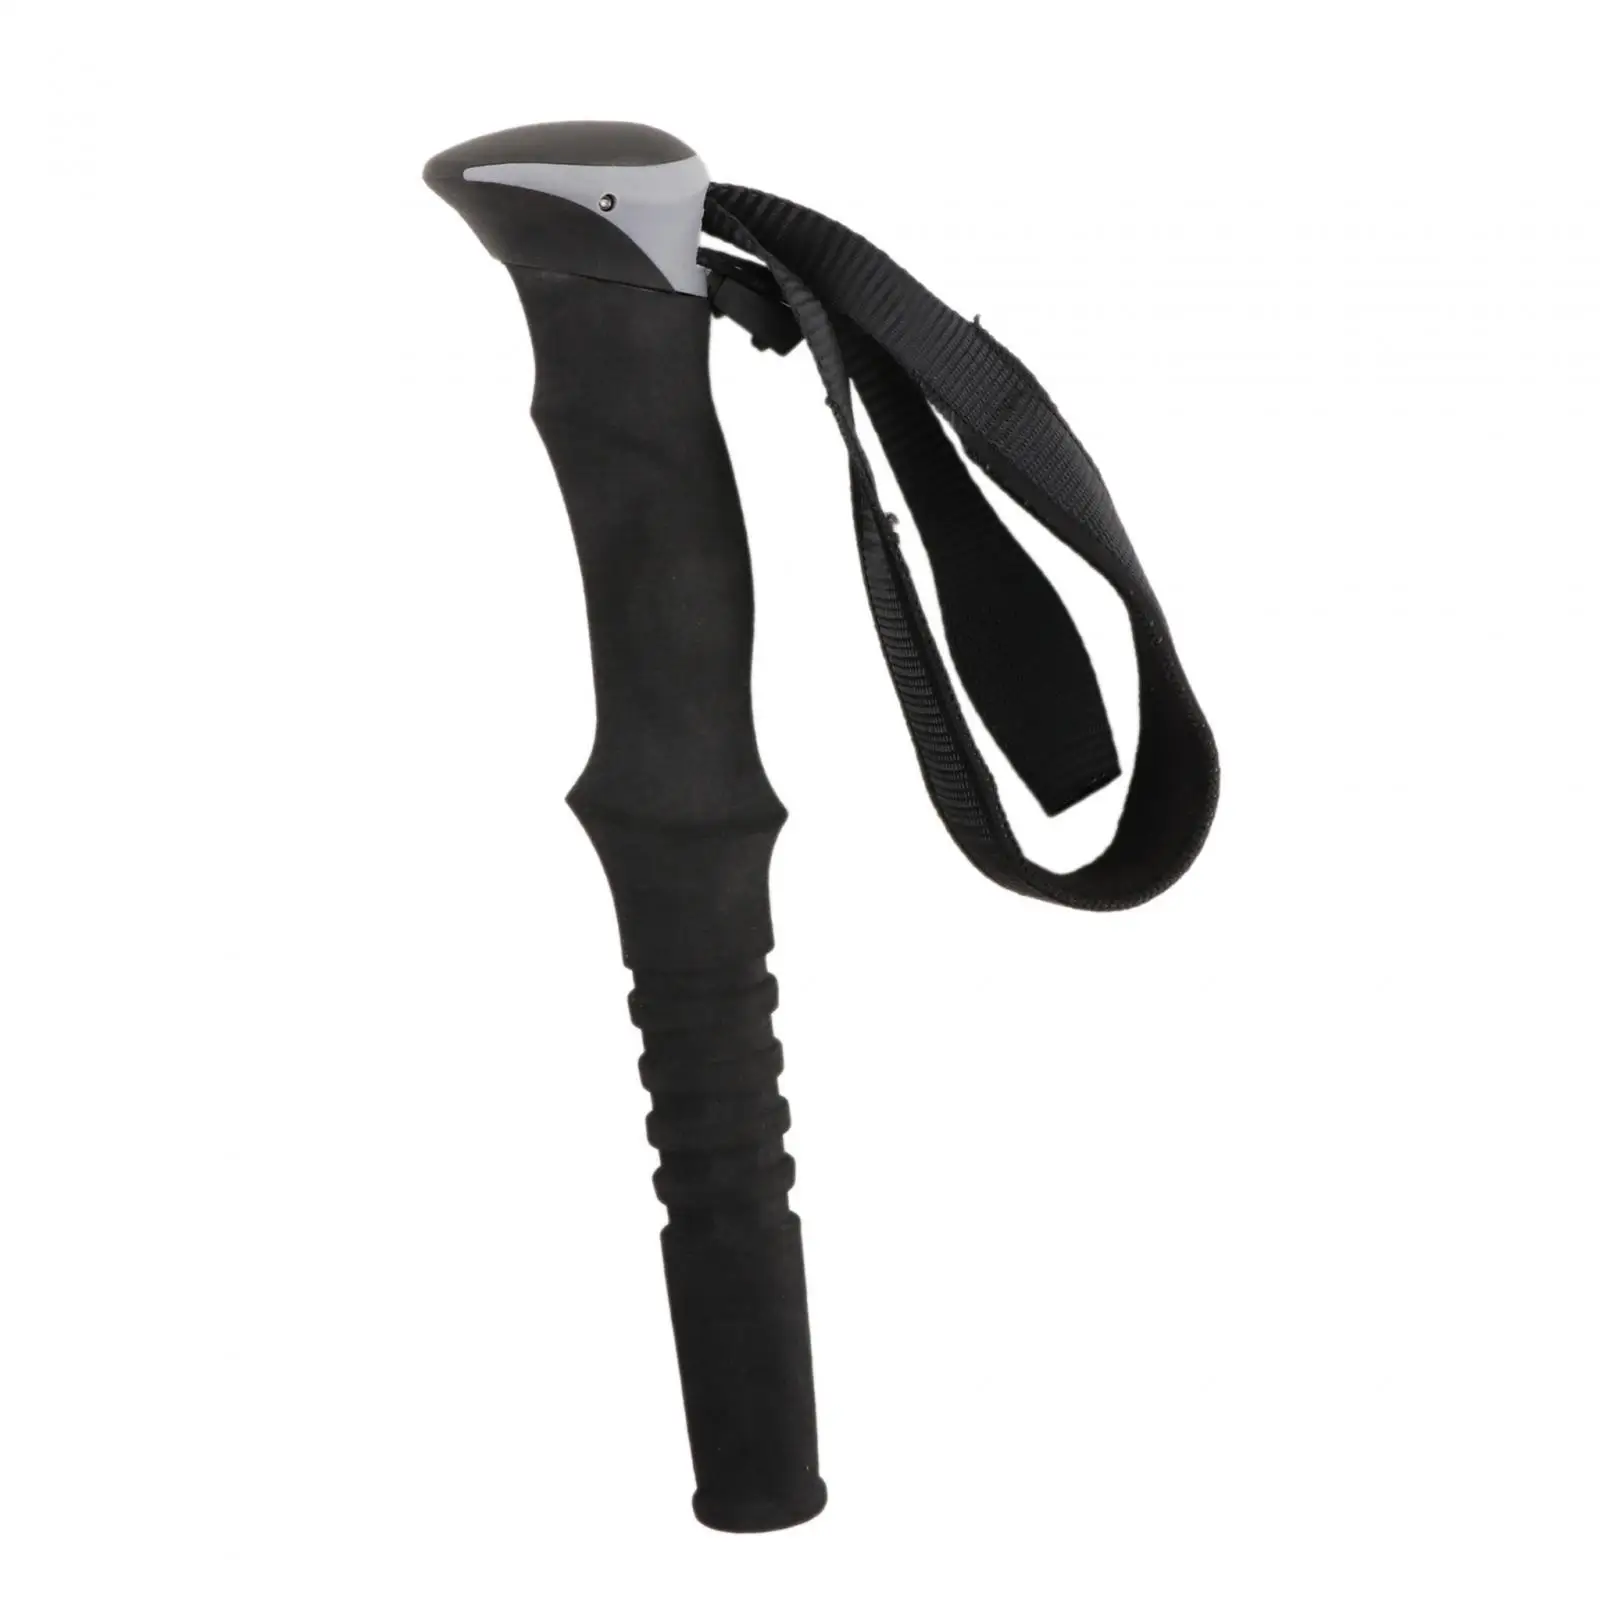 Walking Cane Hand Grip, Accessory Portable Lightweight Cane Grip, for Sports